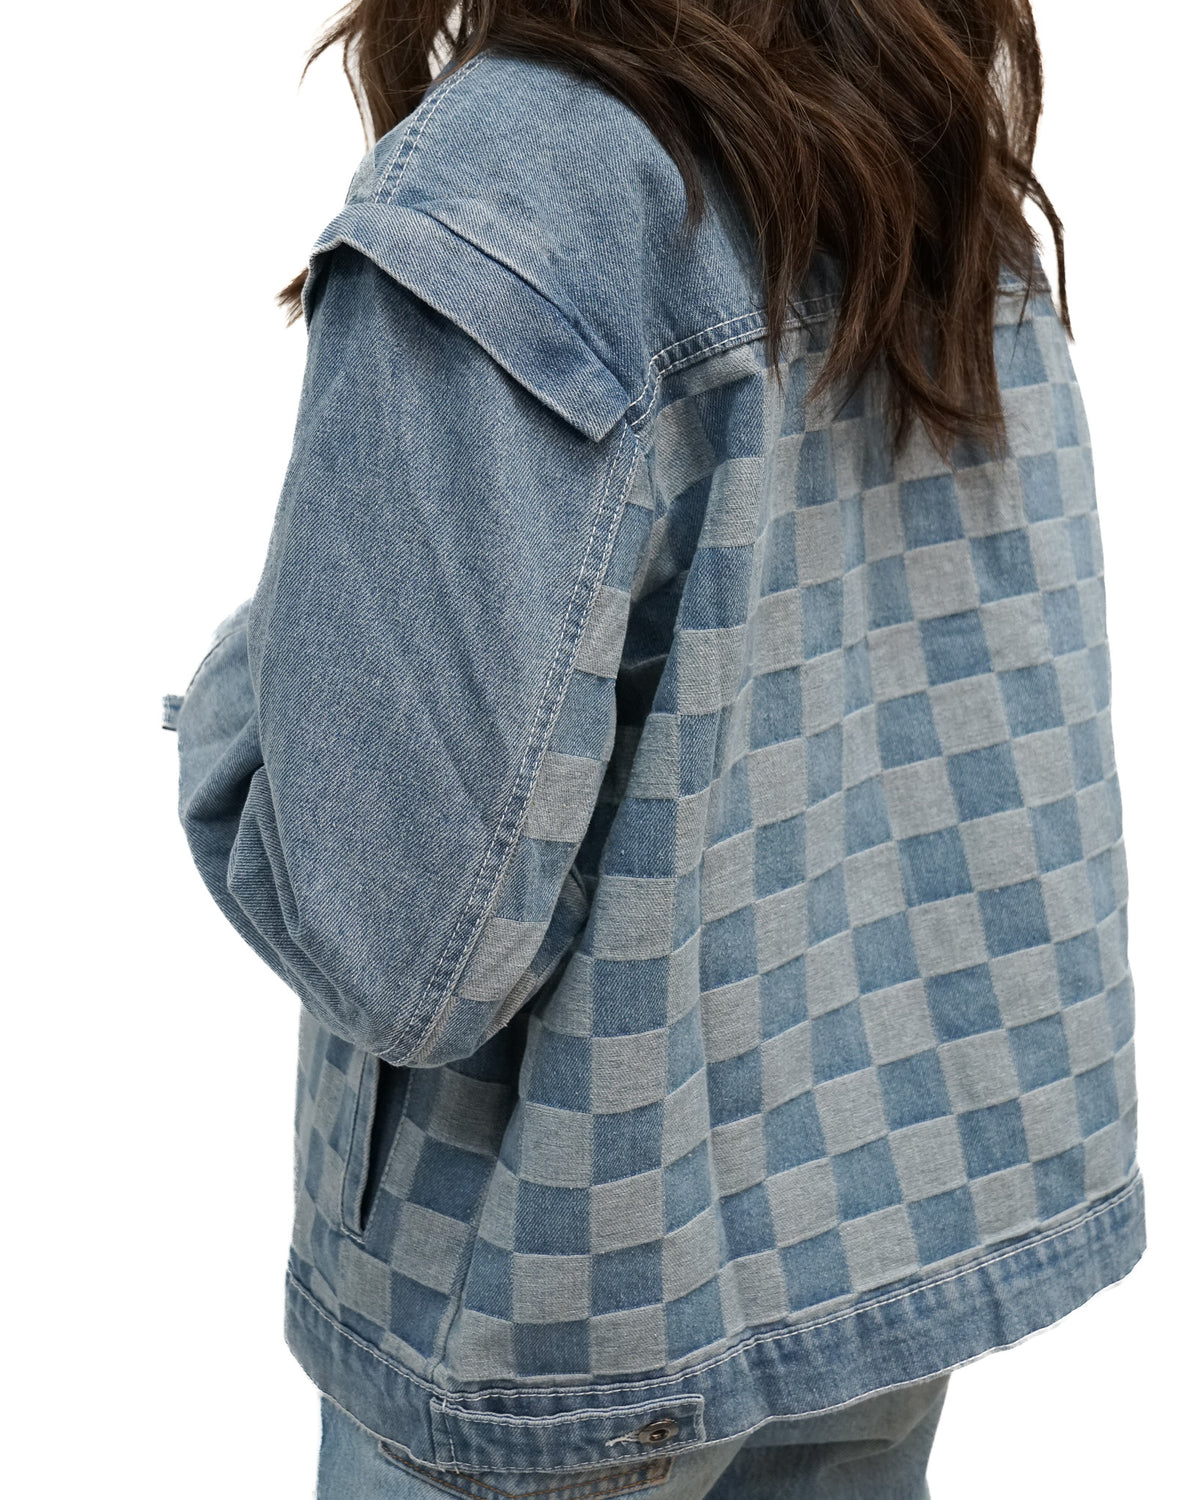 For The Win Denim Jacket